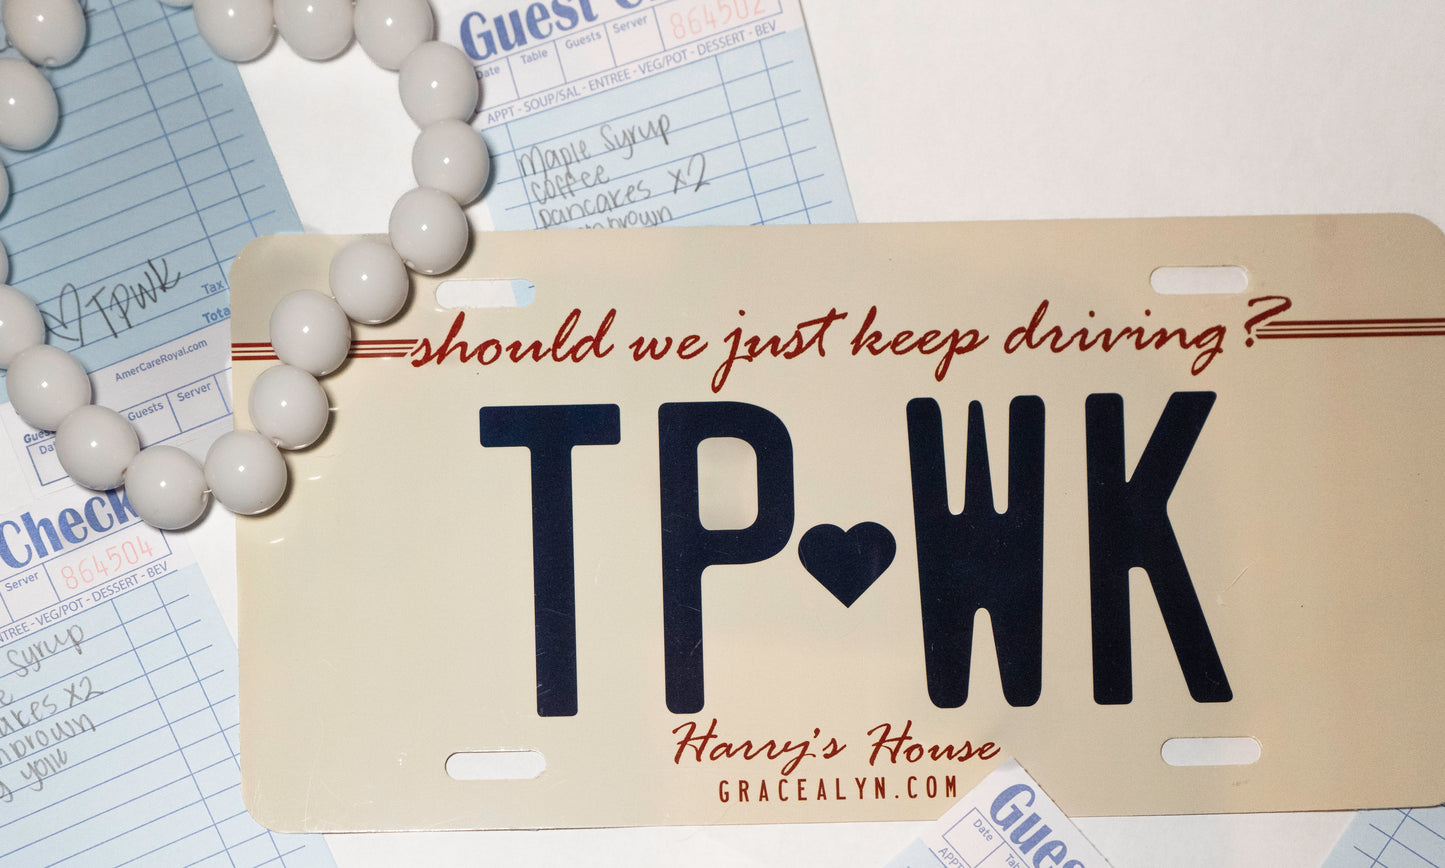 Keep Driving TPWK- License Plate / Wall Decor